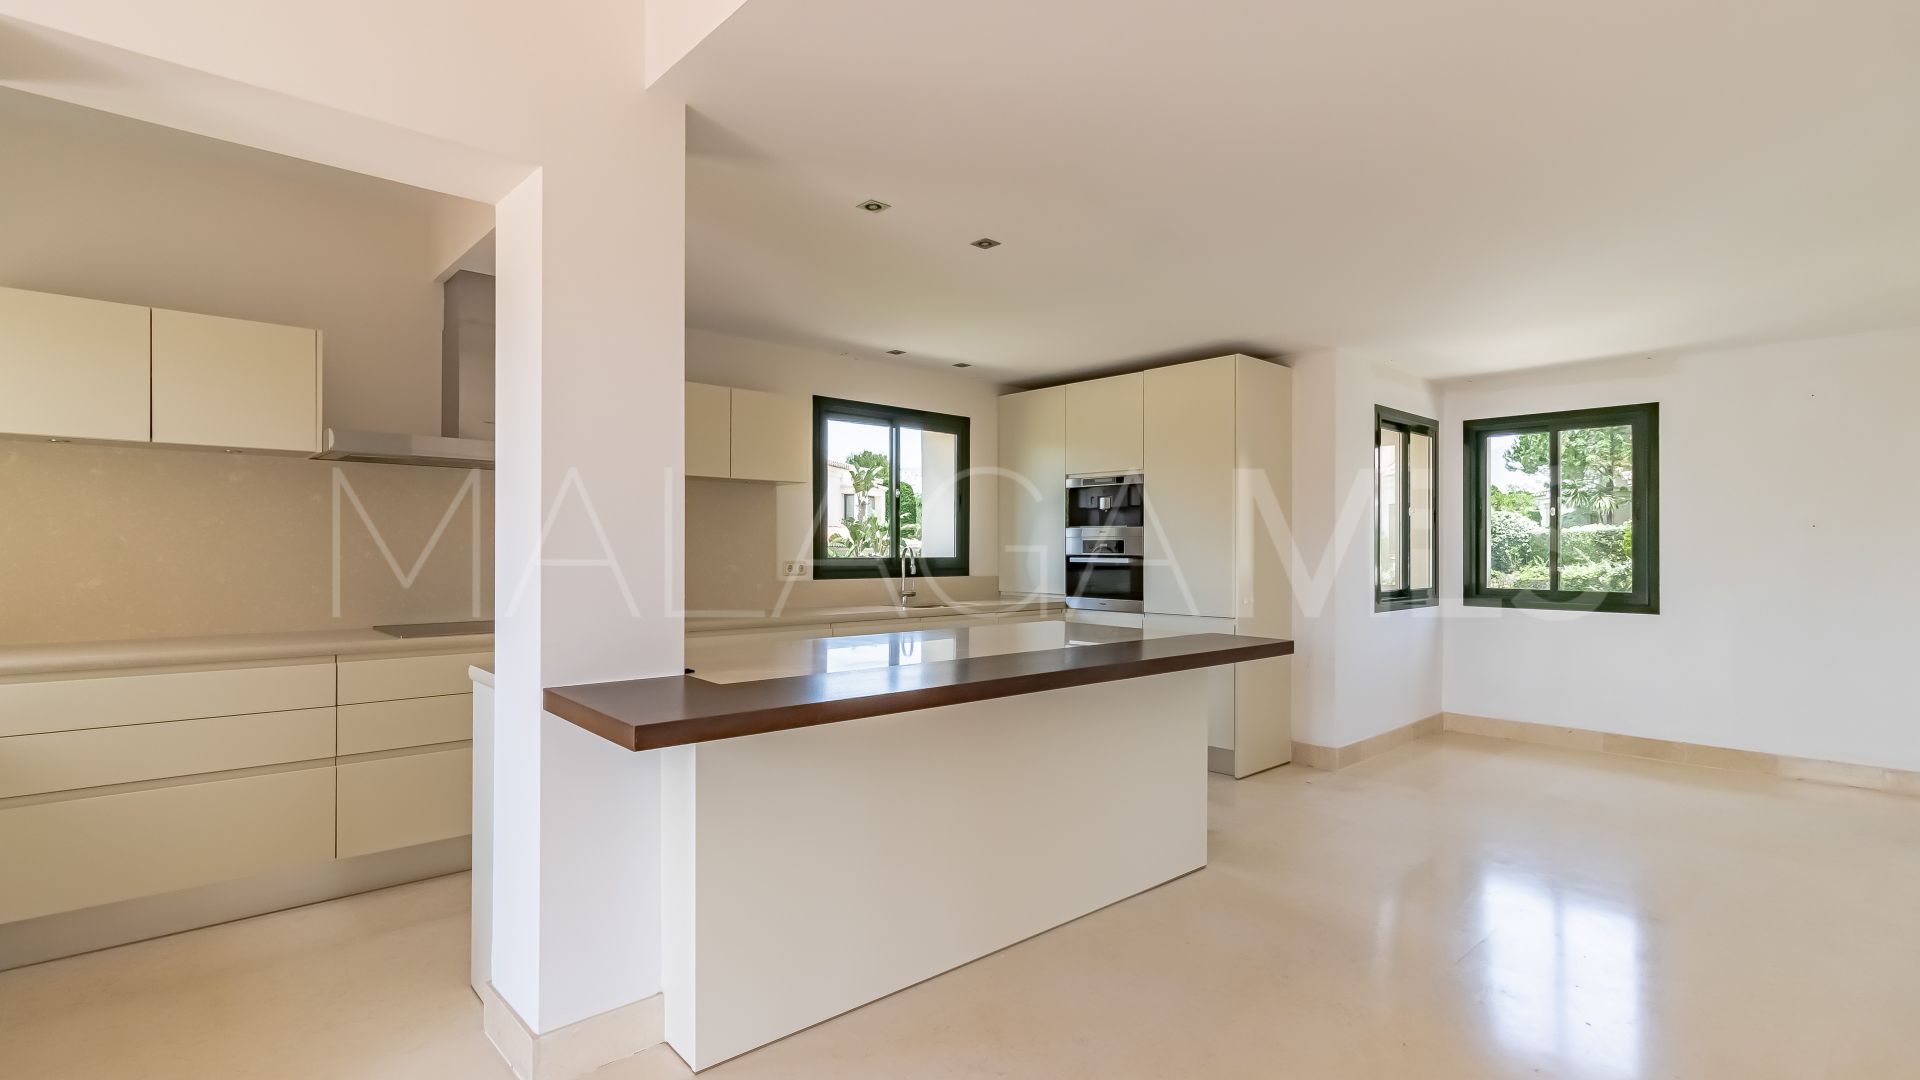 3 bedrooms duplex penthouse in Los Capanes del Golf for sale